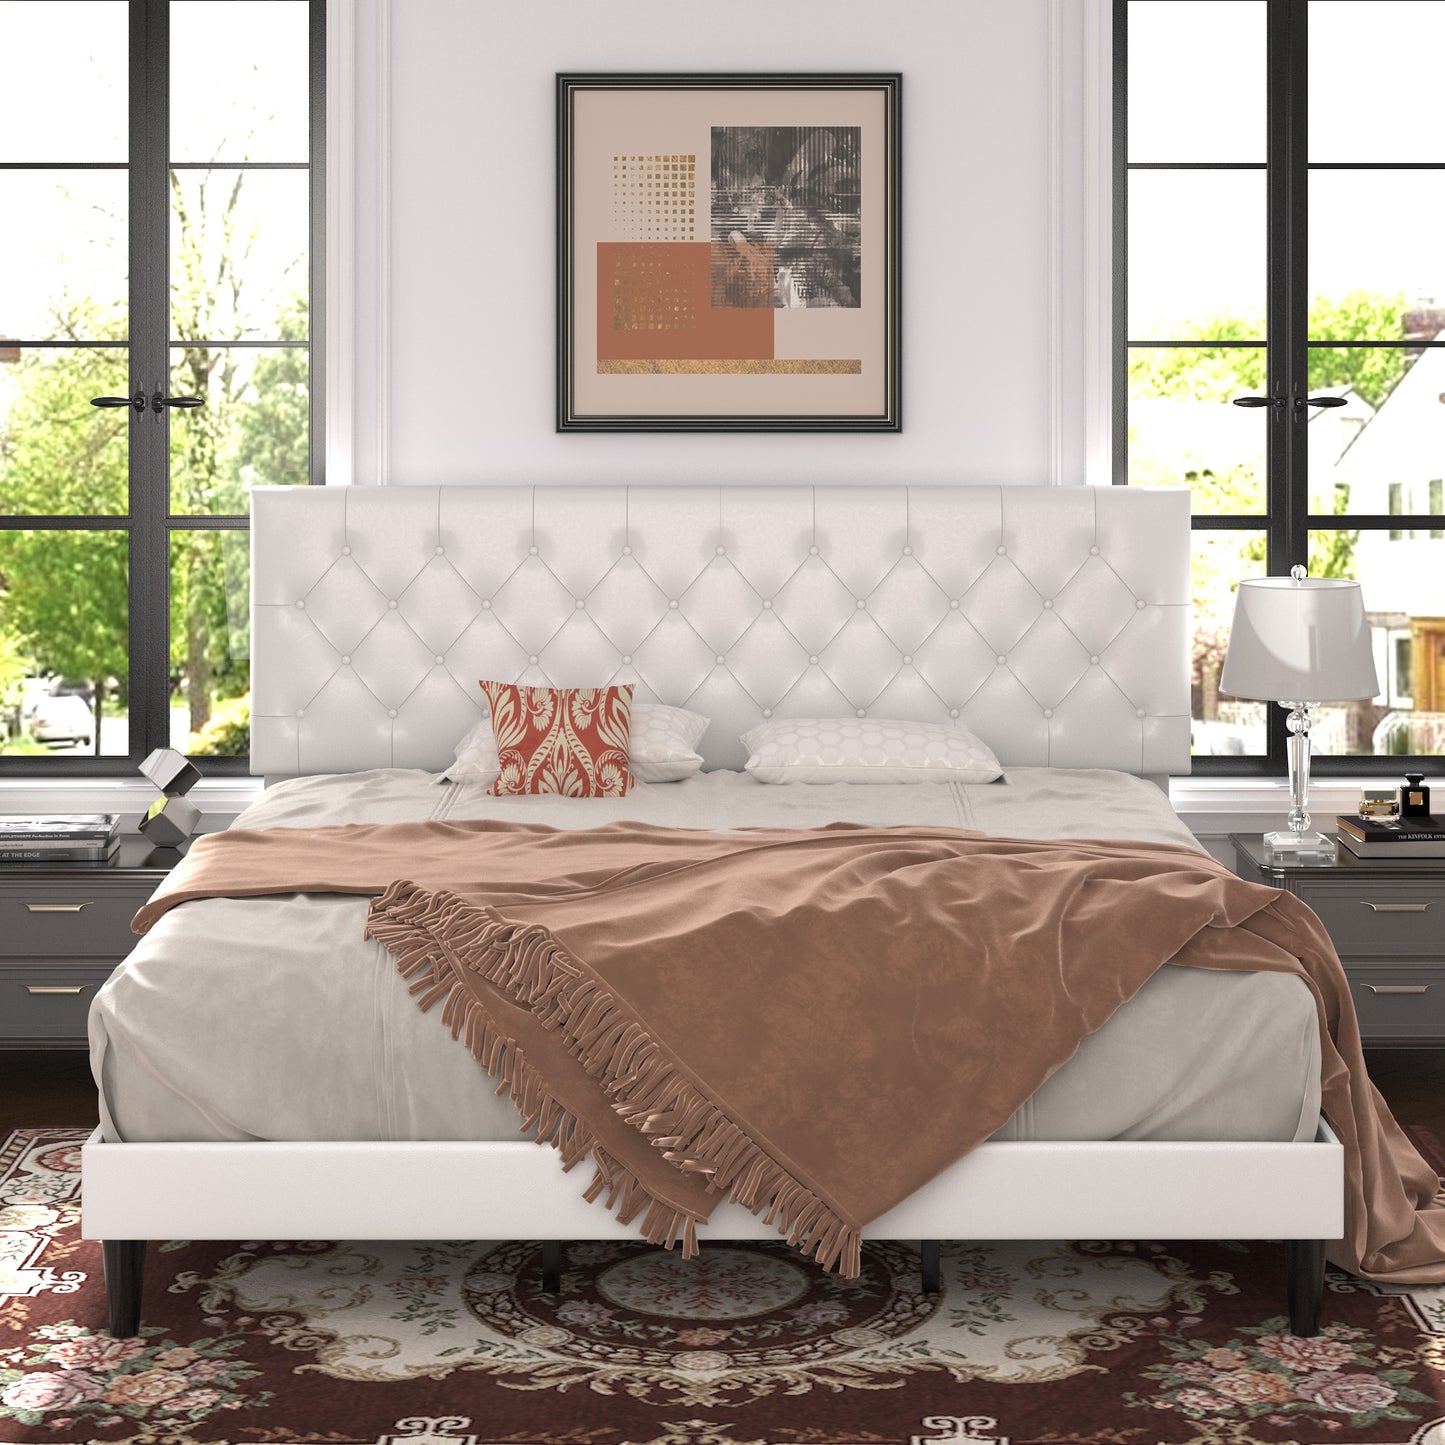 Allewie Faux Leather Upholstered Platform Bed Frame with Adjustable Diamond Stitched Button Tufted Headboard, White